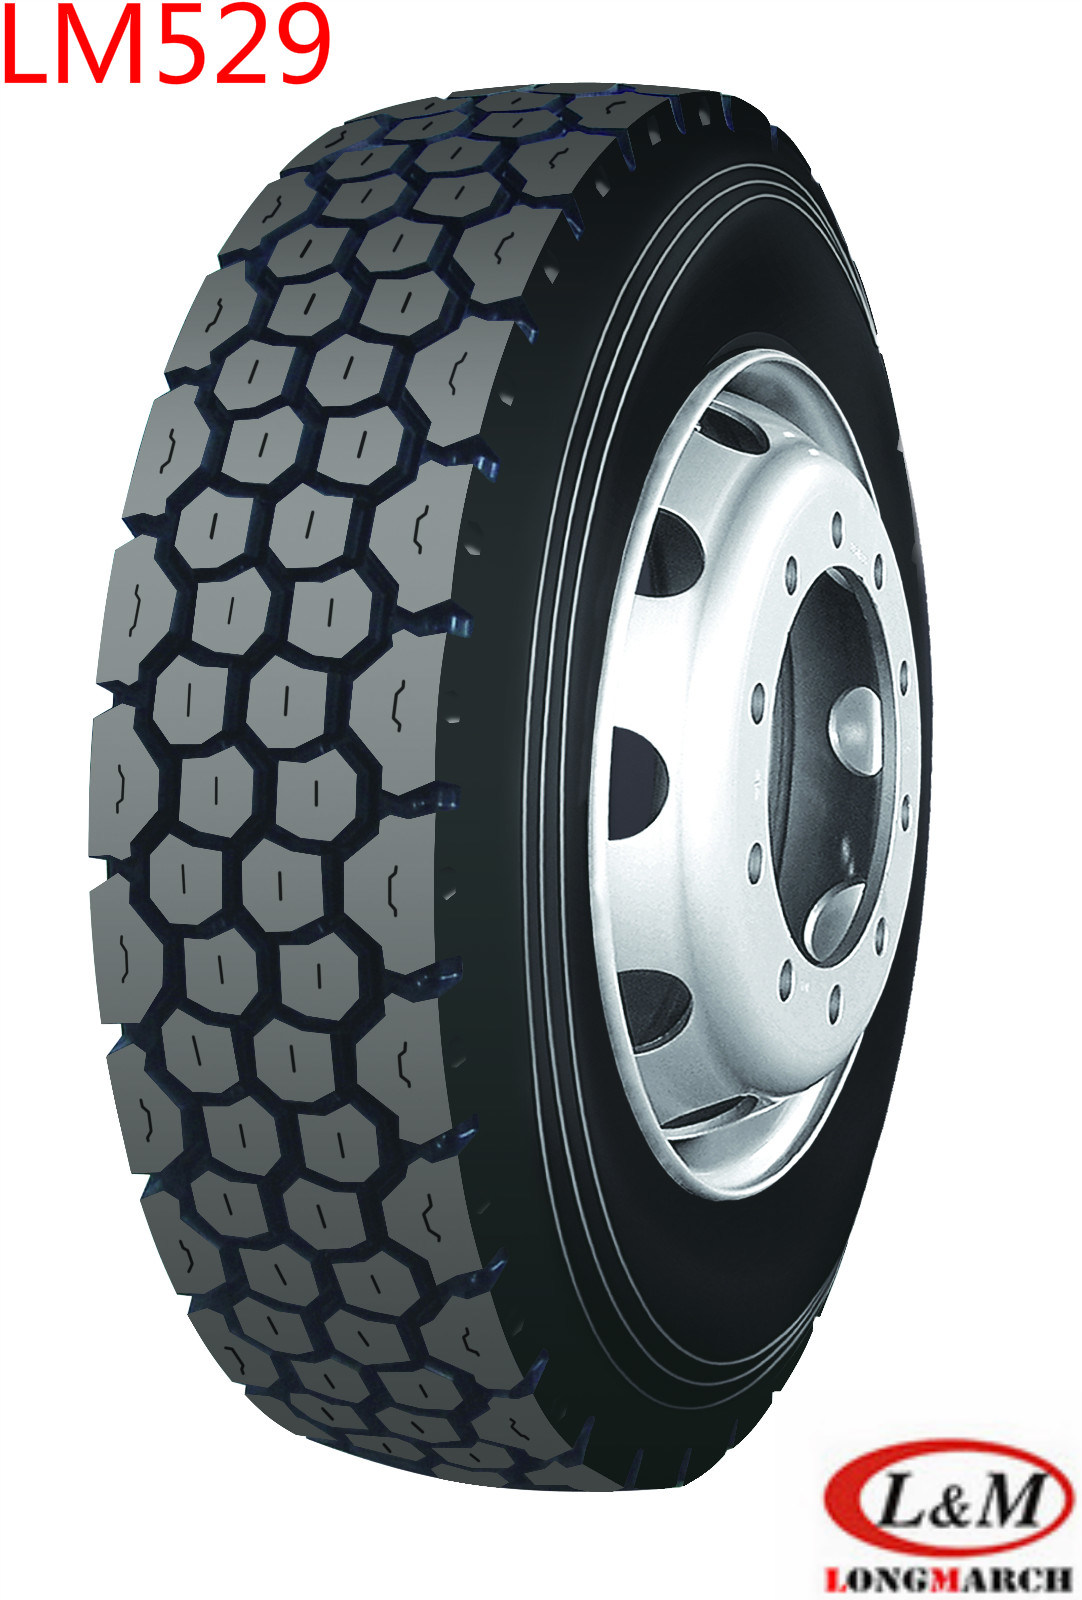 China Longmarch Drive/Trailer Position Distance Service Radial Truck Tire (LM529)